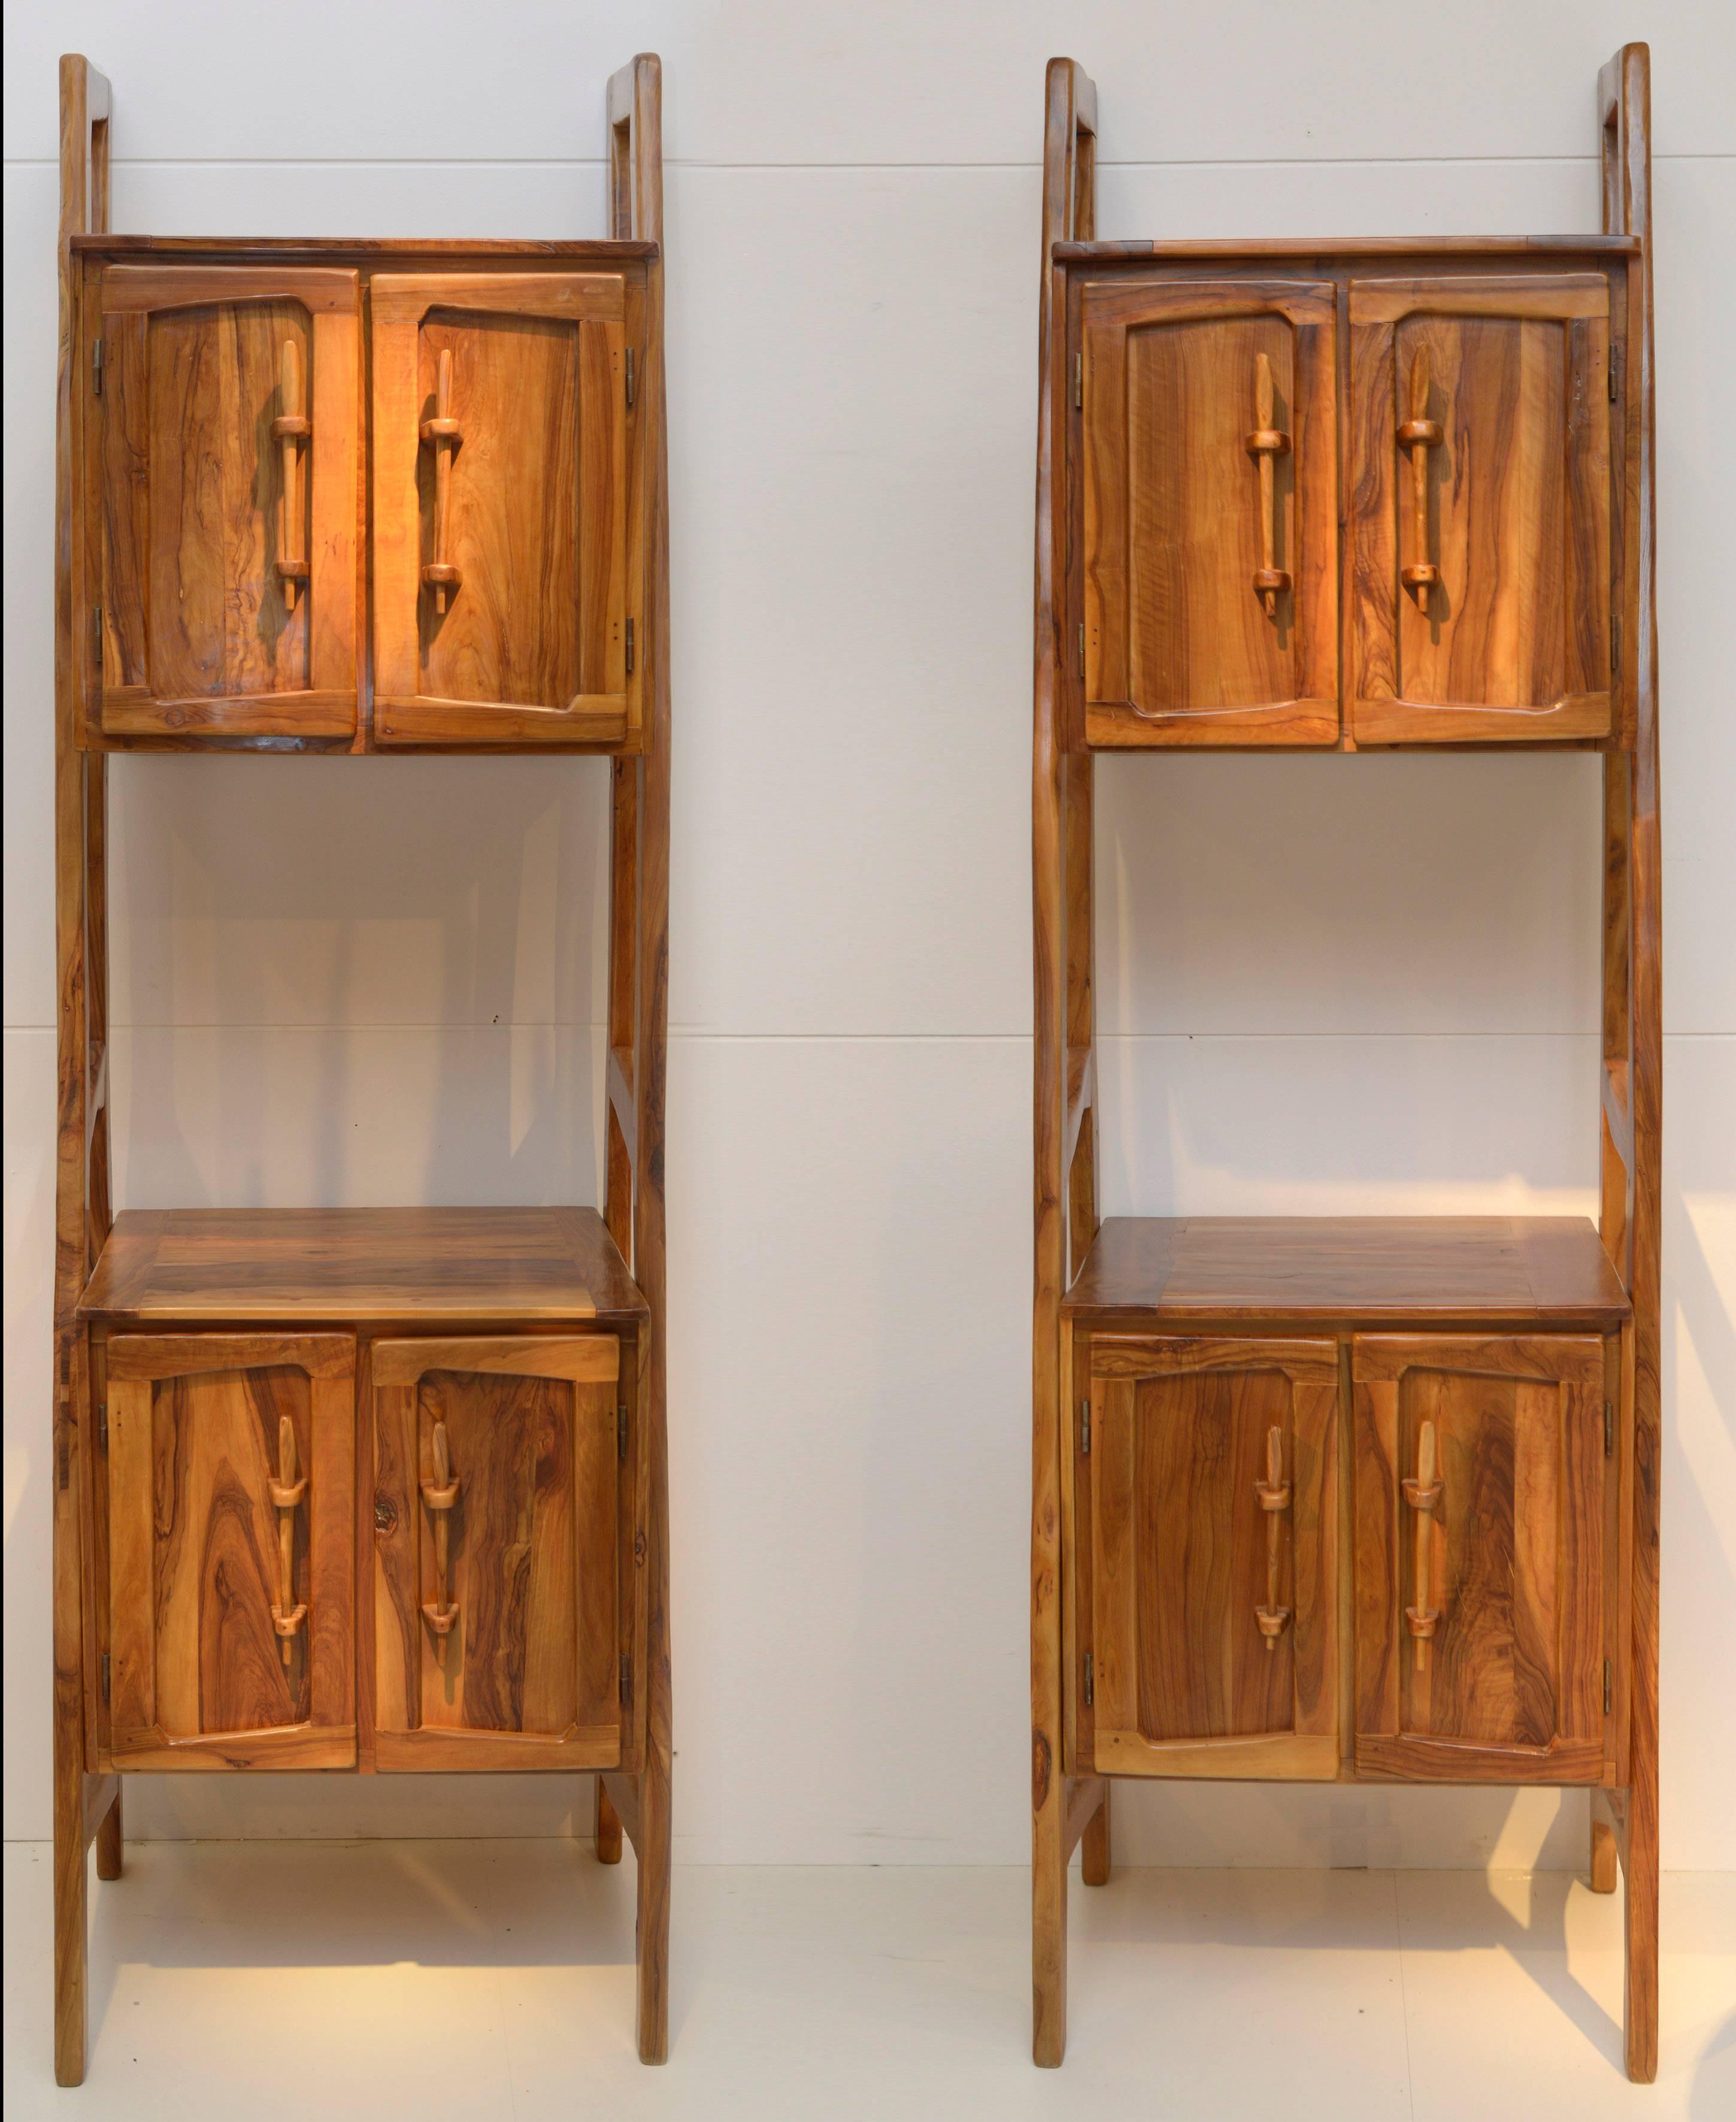 Pair of outstanding Italian, 1960s solid olive wood cabinets
four doors, shelves.